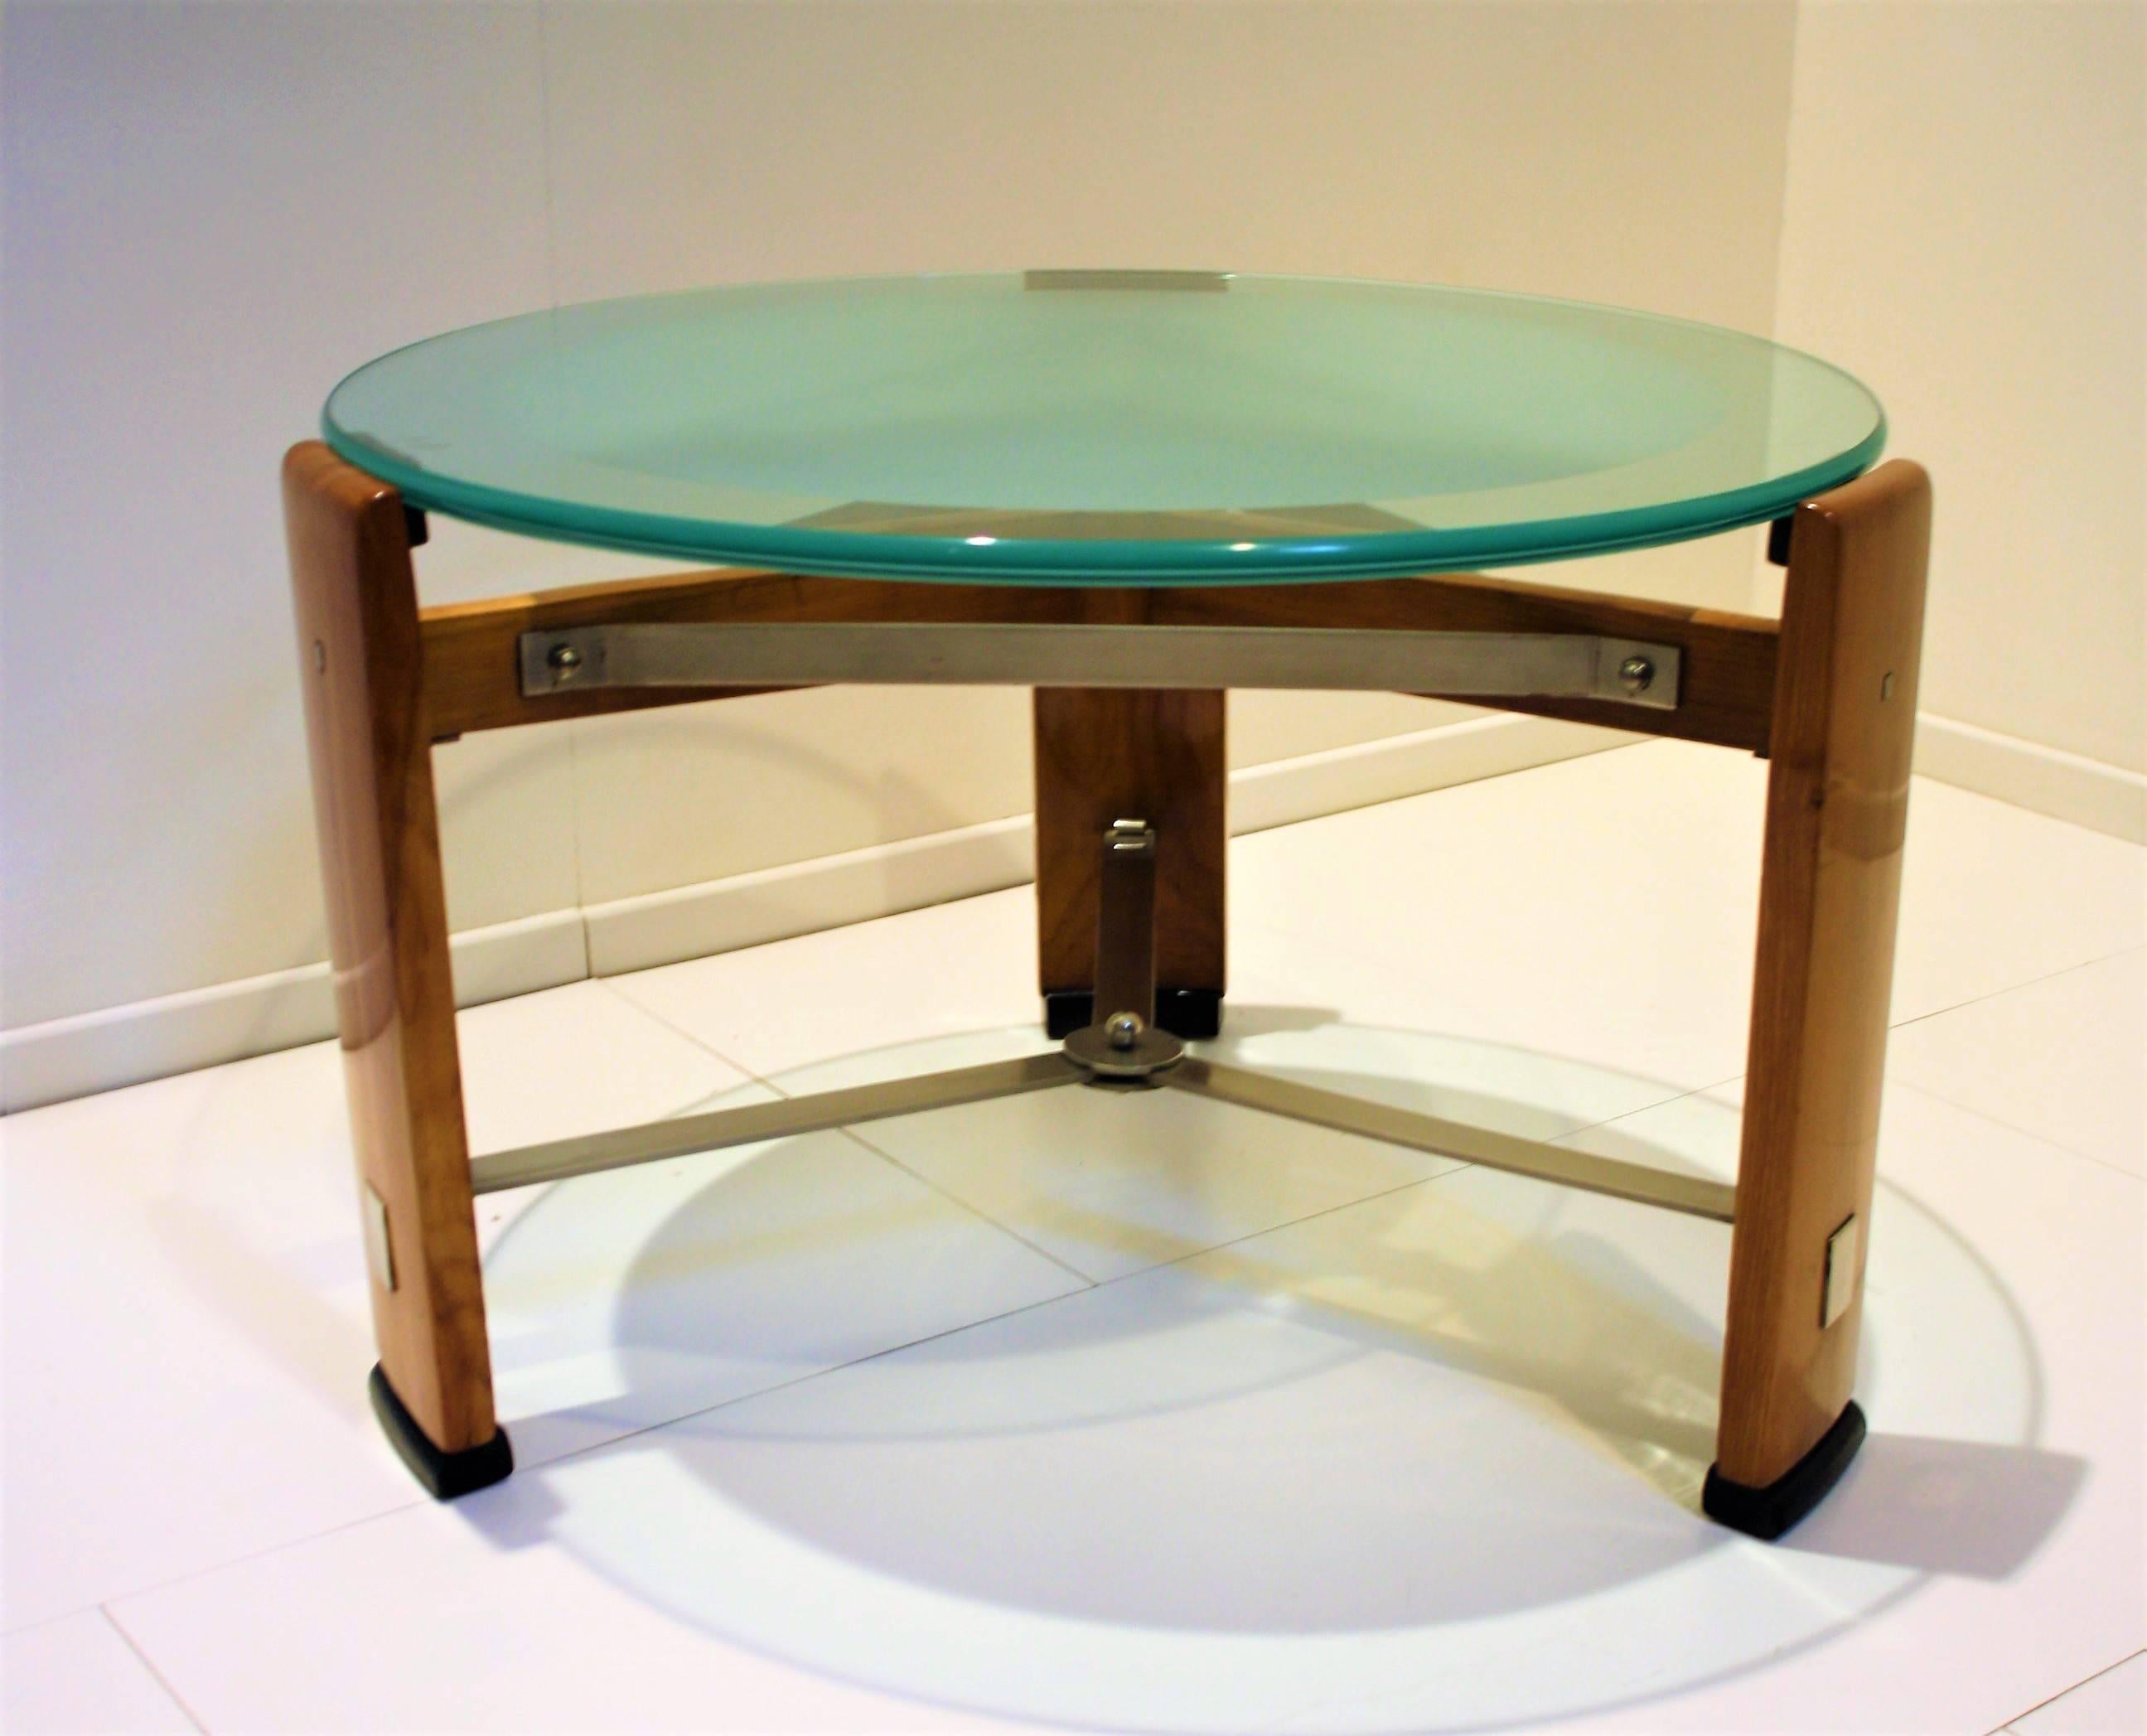 Early 20th Century Modernist Art Deco Coffee Table Signed by Chambon, 1920s